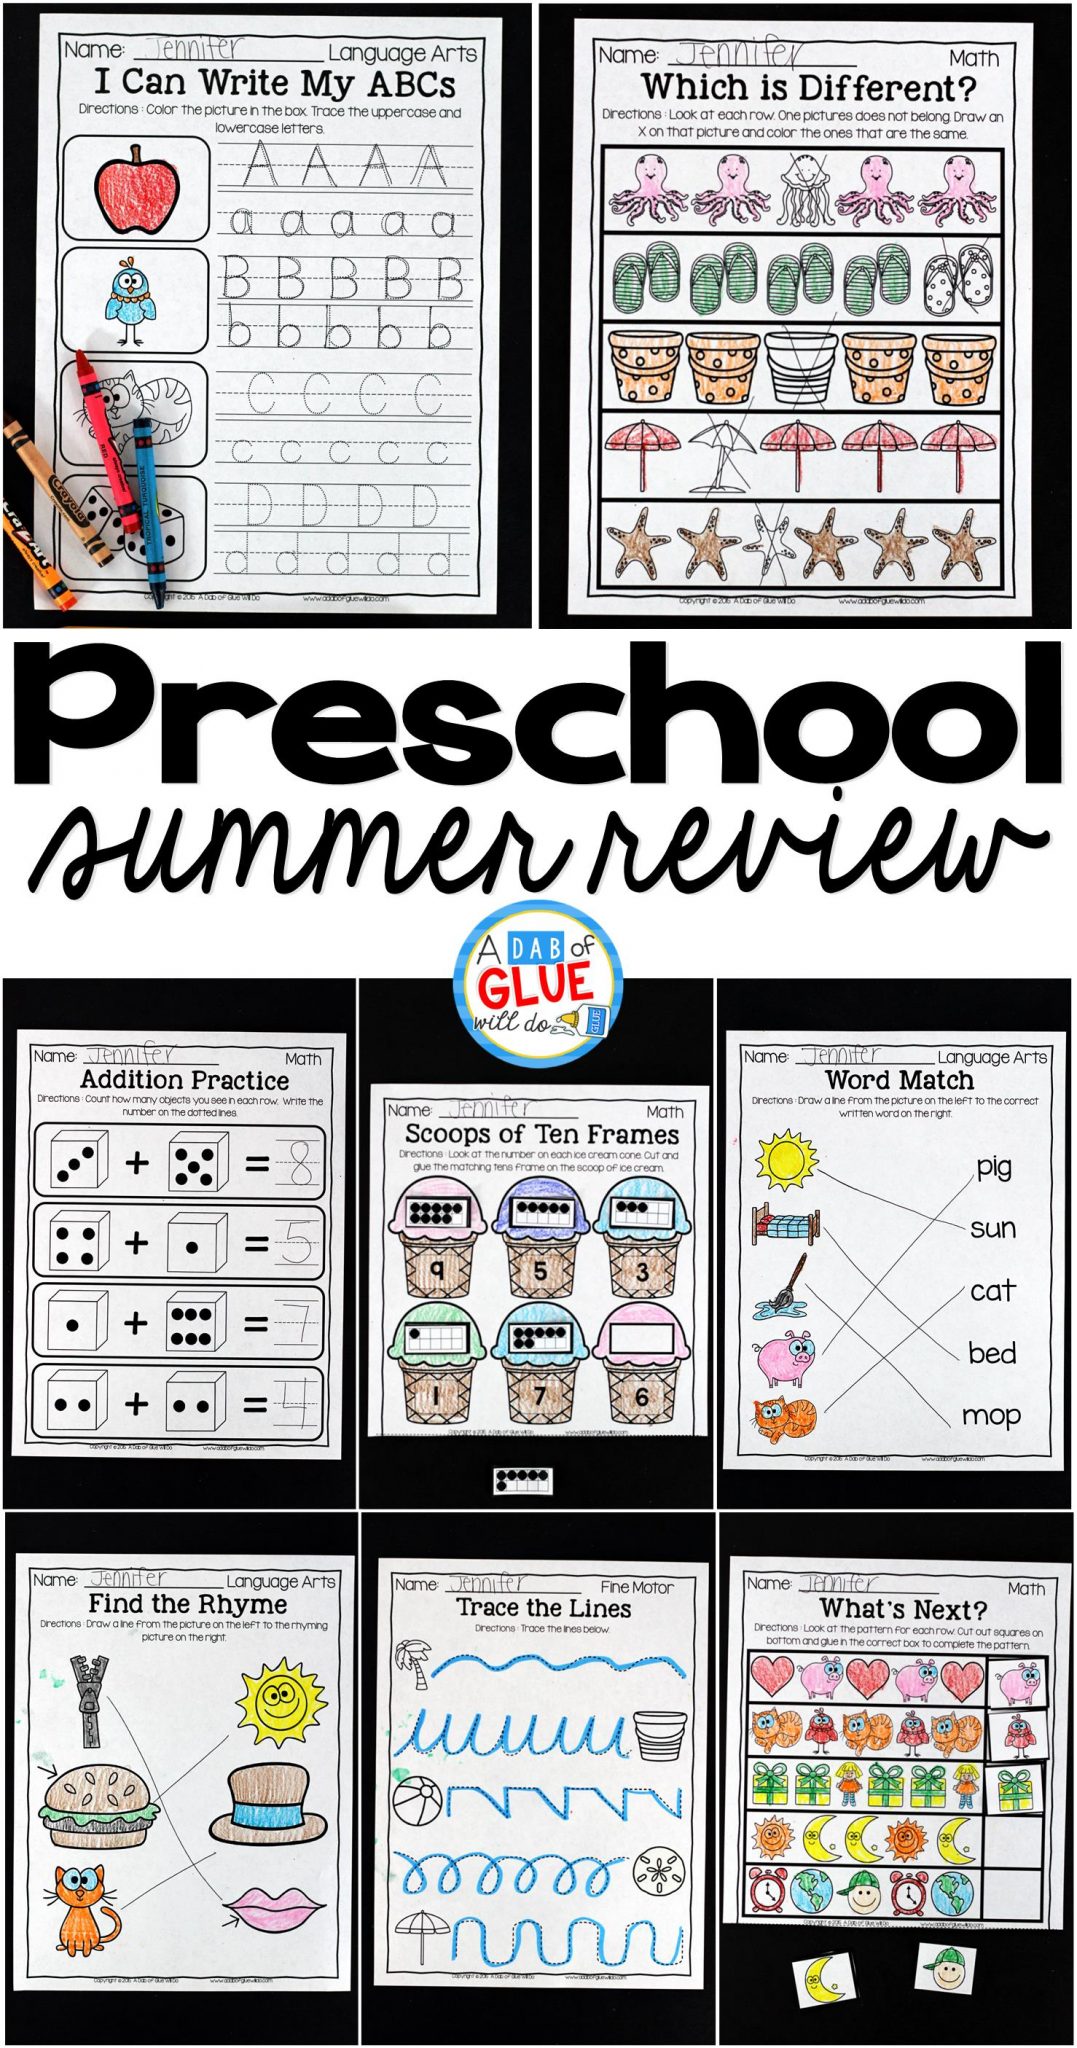 The perfect NO PREP Preschool (Pre-K) Summer Review to help your Preschool (Pre-K) students with hands-on learning over summer break! Give your students going into Kindergarten fun review printables to help prevent the summer slide and set them up for Kindergarten success. This kindergarten prep packet is also perfect for a back to school refresher that will have your students ready for the new school year in no time. This review is packed full of engaging homework review activities that will bring a smile to their sweet faces as they work on math, fine motor, language arts! Parents will enjoy the student's focus on summer homework and Kindergarten teachers will LOVE their new students ready for Kindergarten work. Simply print, staple, and send home with your students before the end of year.